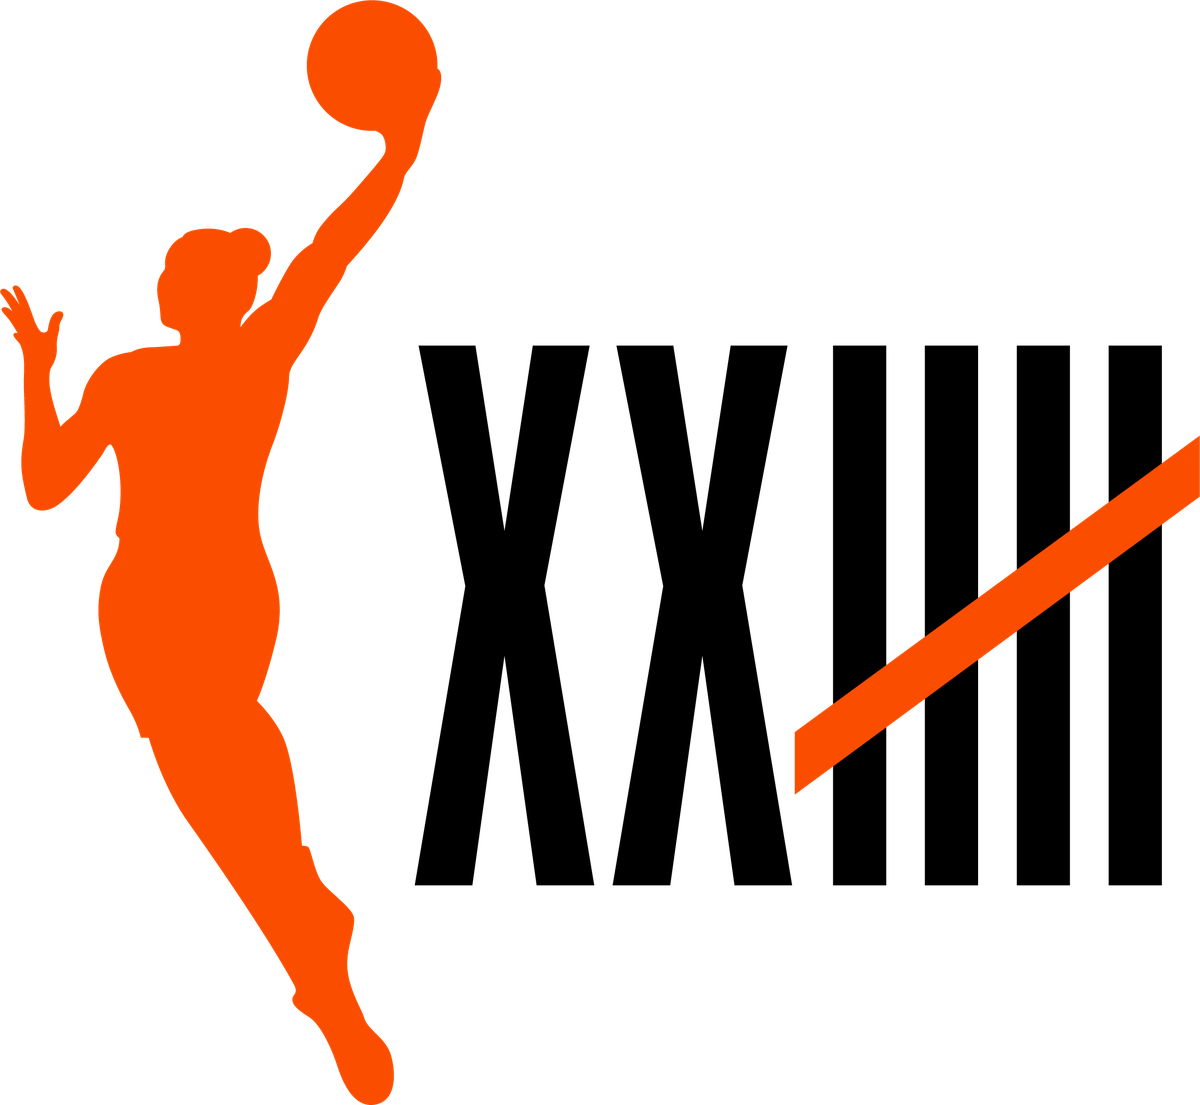 new wnba logo, orange woman with a ball and roman numerals